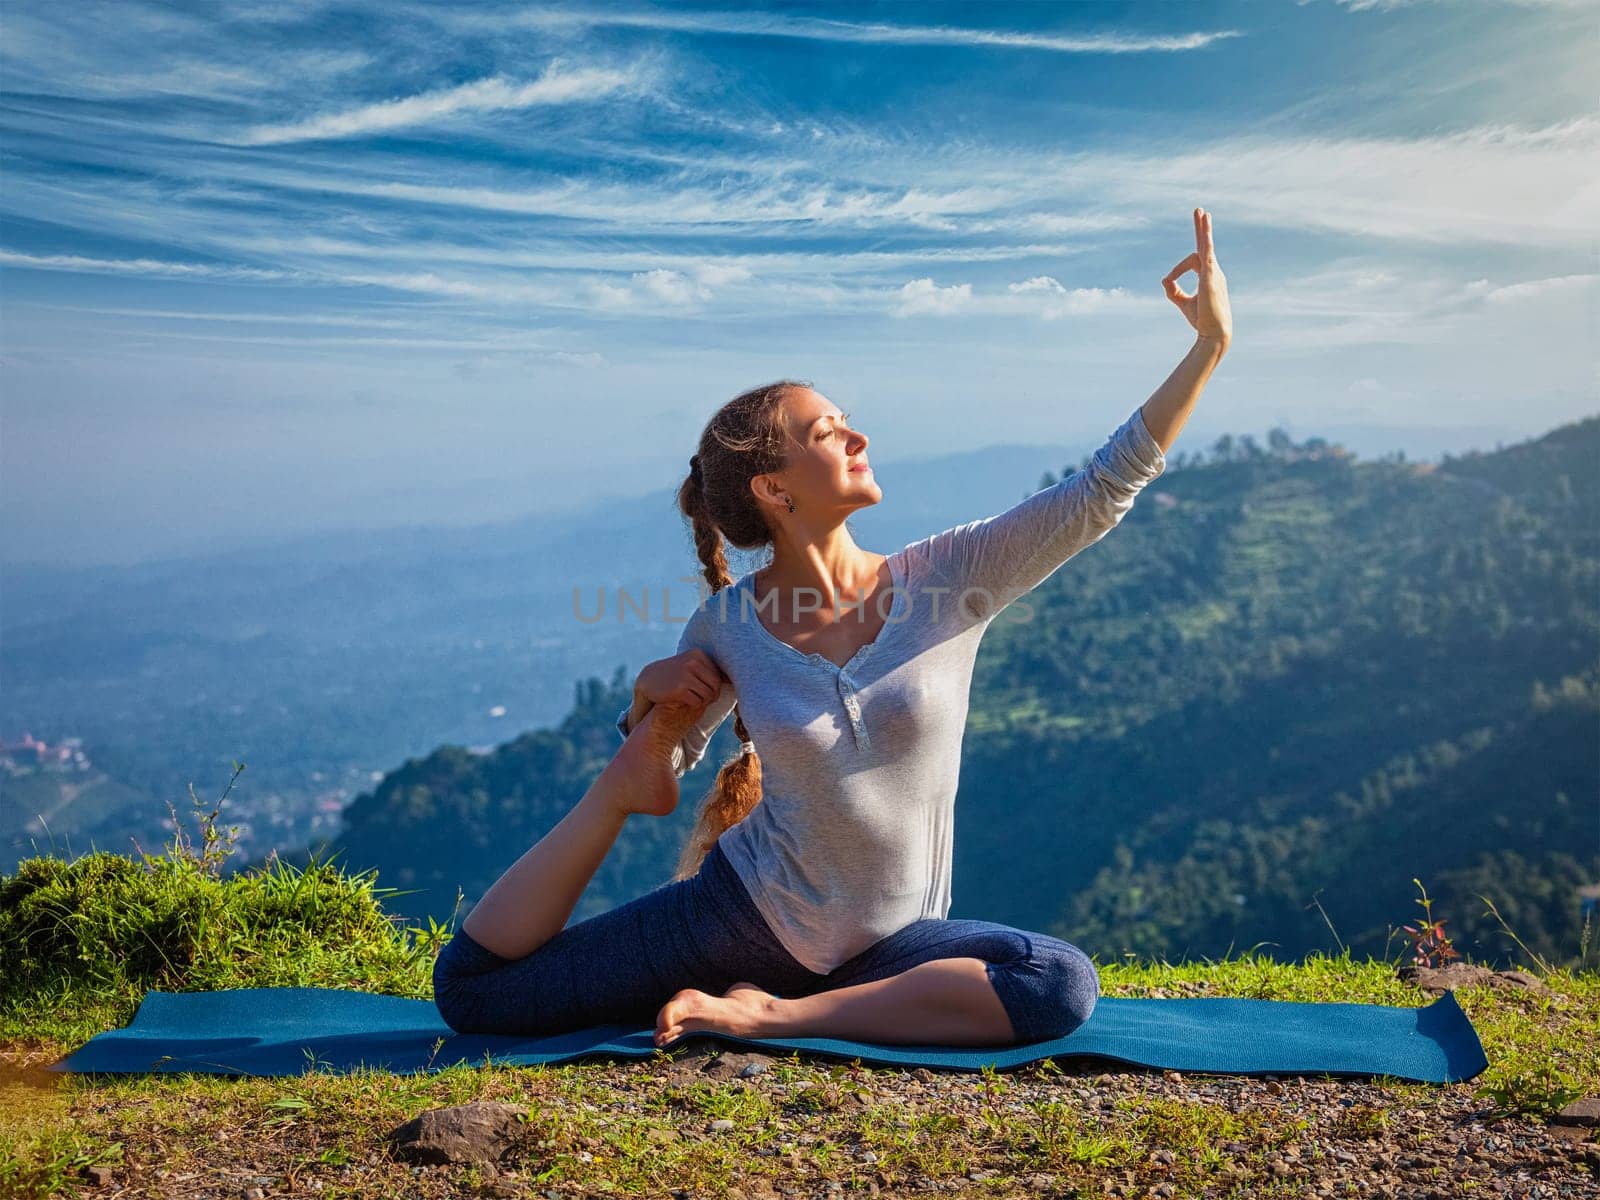 Sorty fit woman doing yoga asana outdoors in mountains by dimol